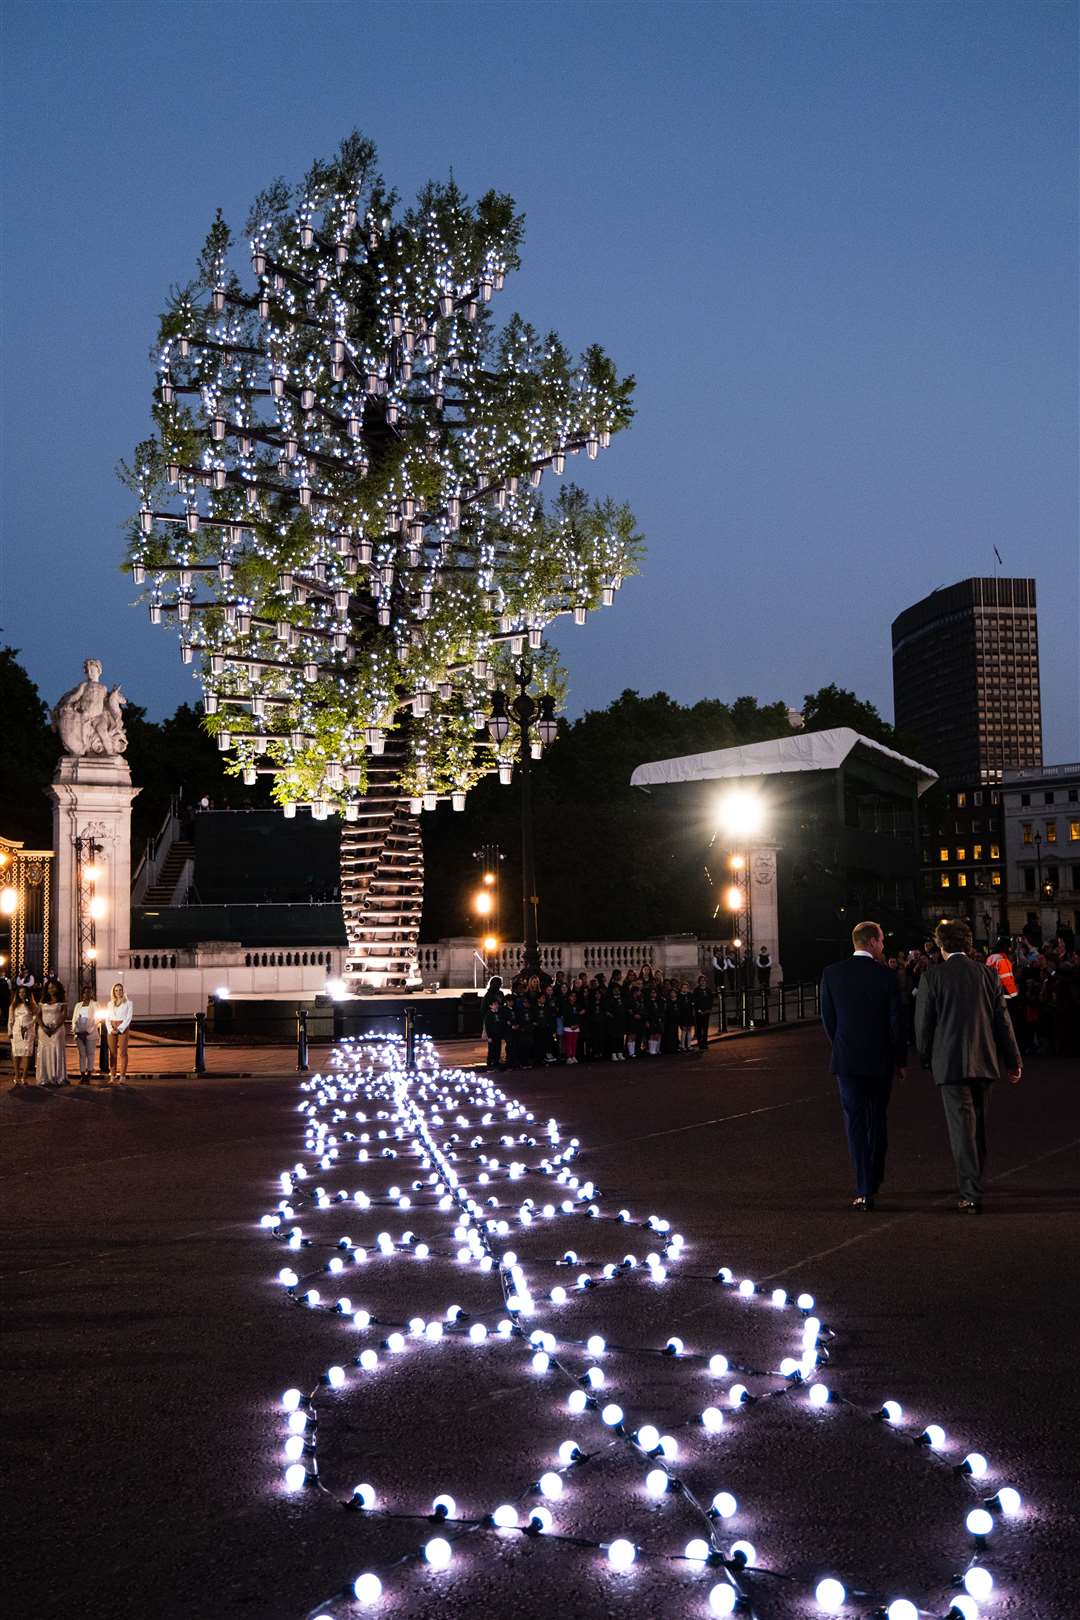 A total of 350 trees made up the Tree of Trees outside Buckingham Palace. Picture: The Queen's Green Canopy